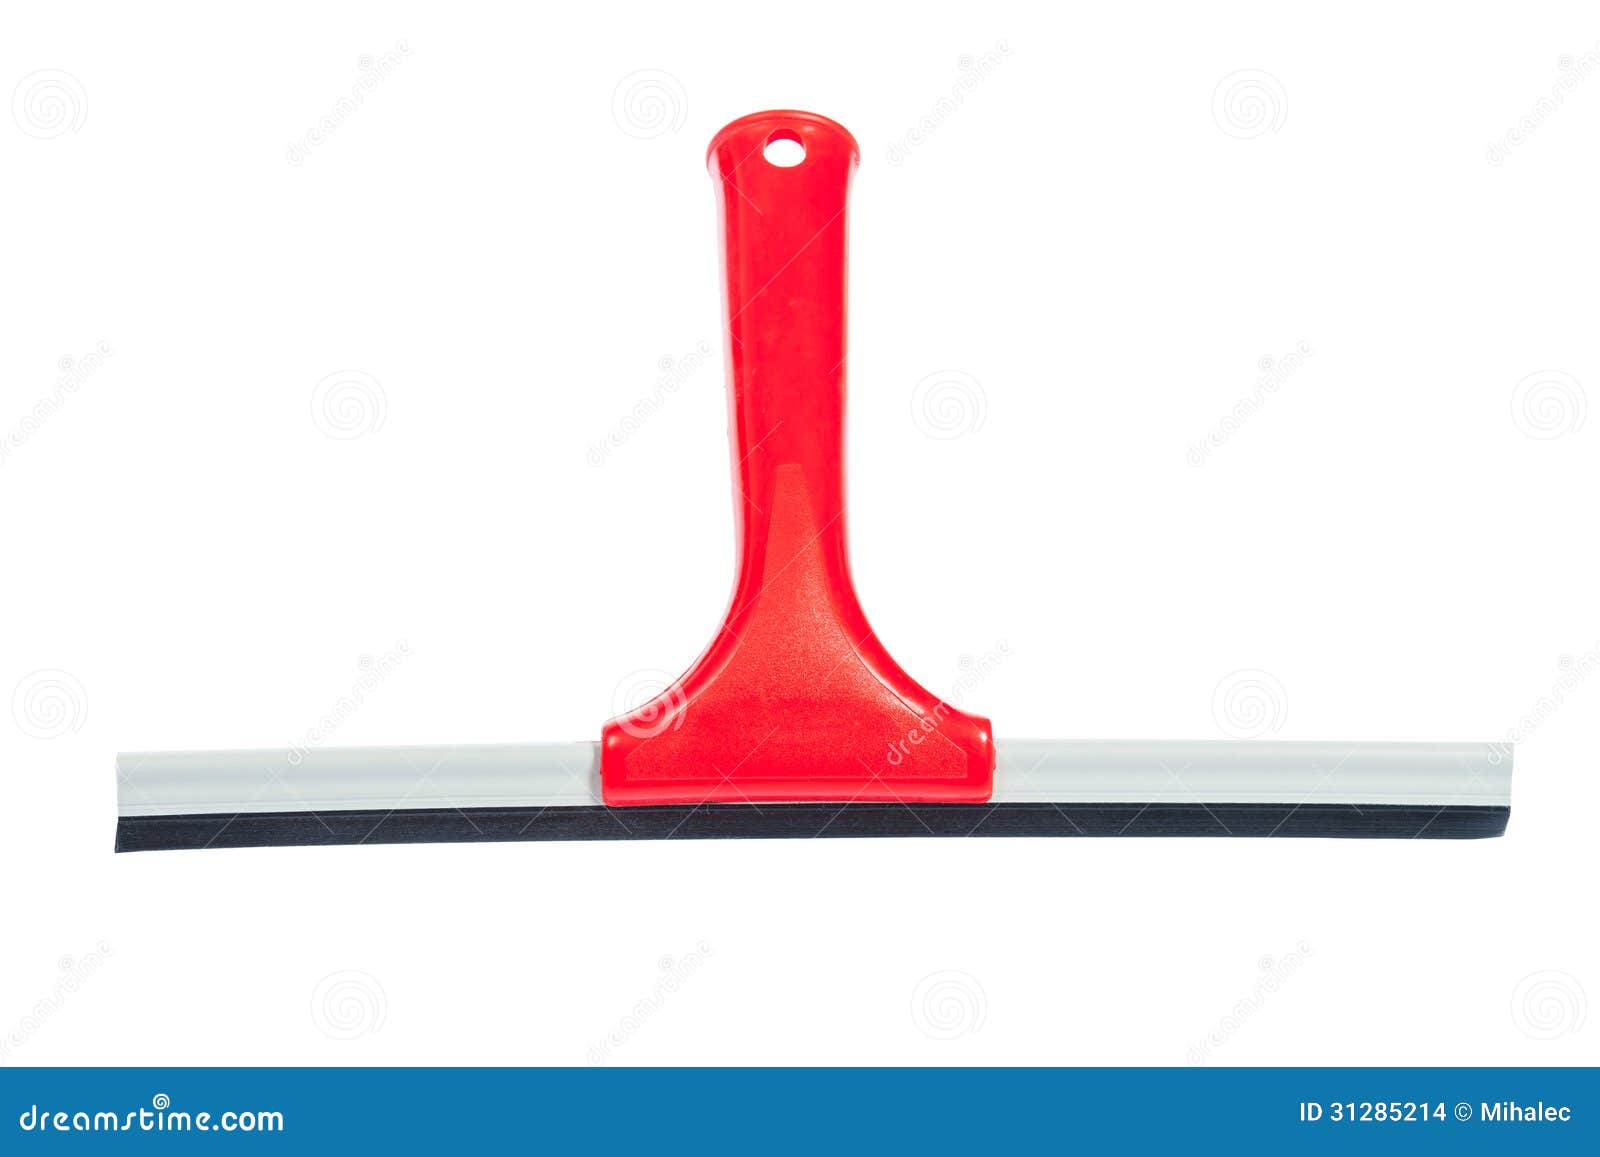 window squeegee clipart - photo #6